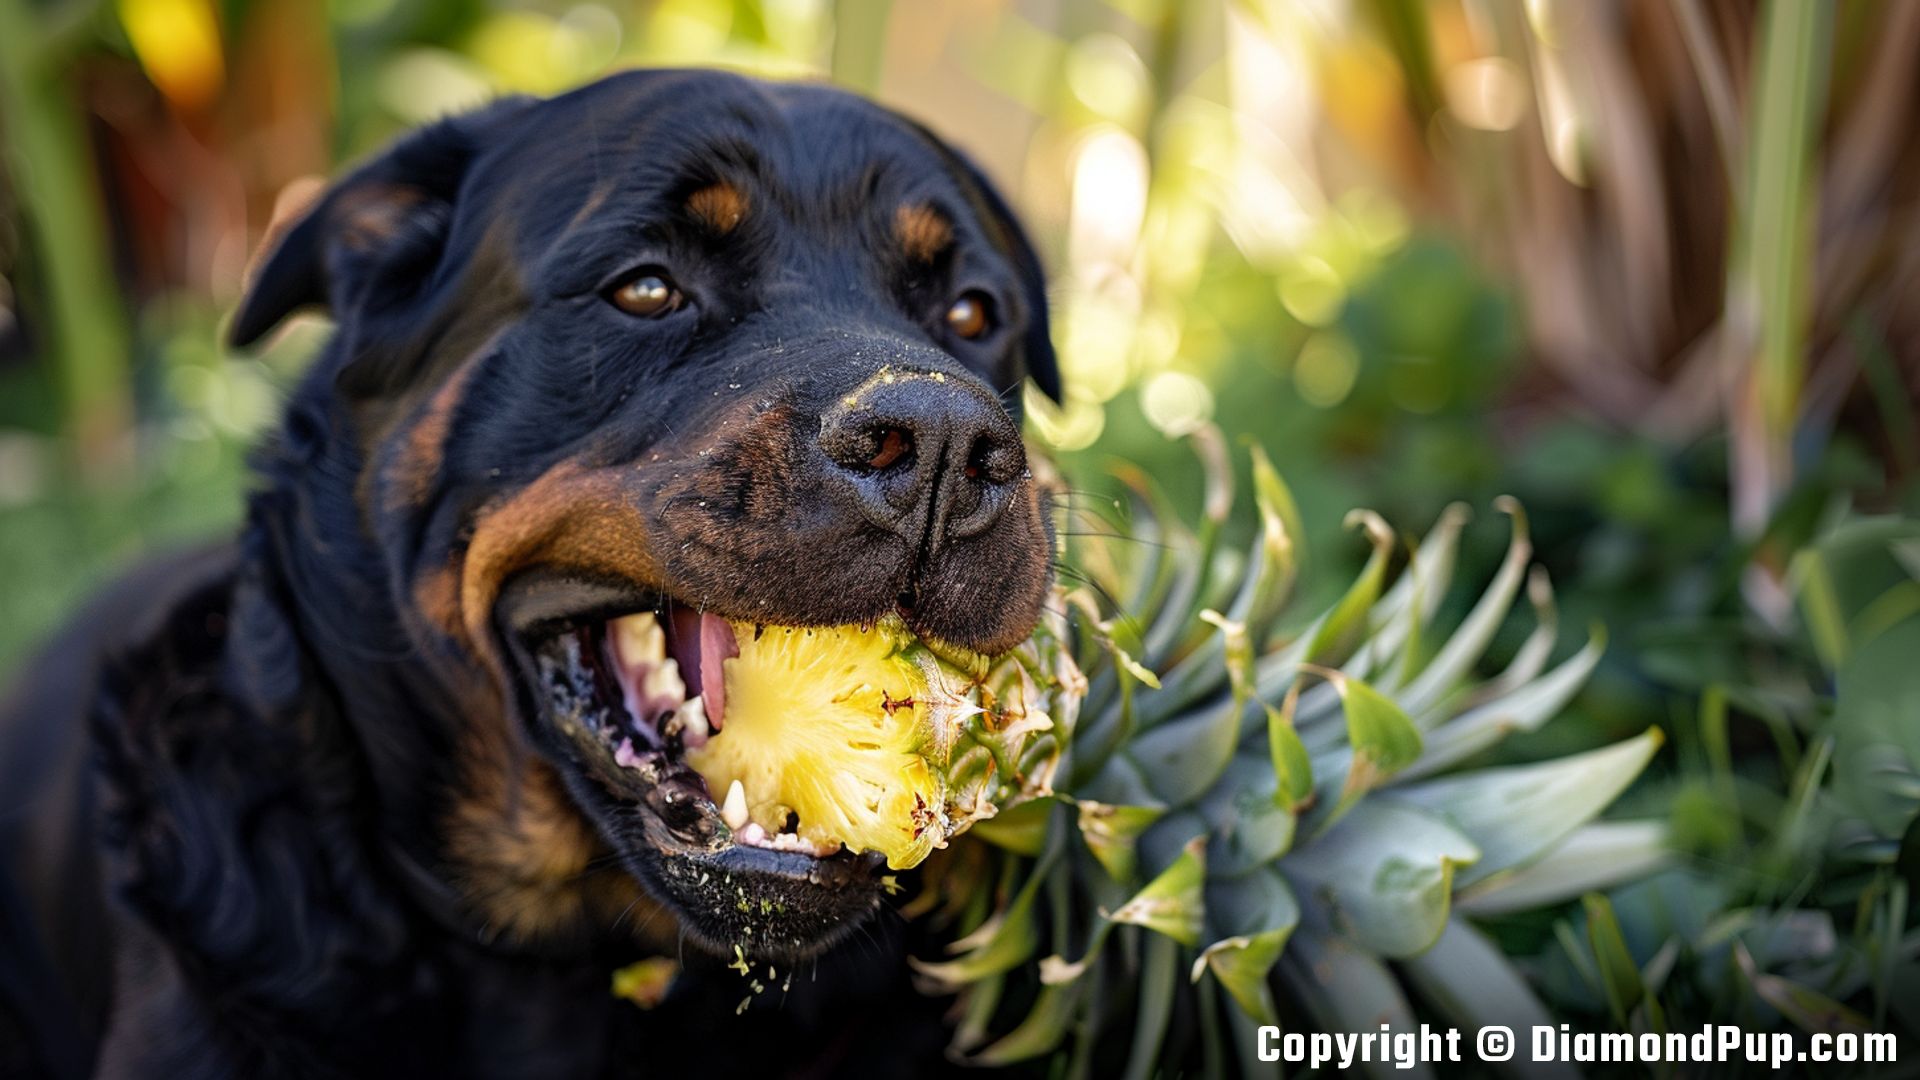 Image of Rottweiler Snacking on Pineapple